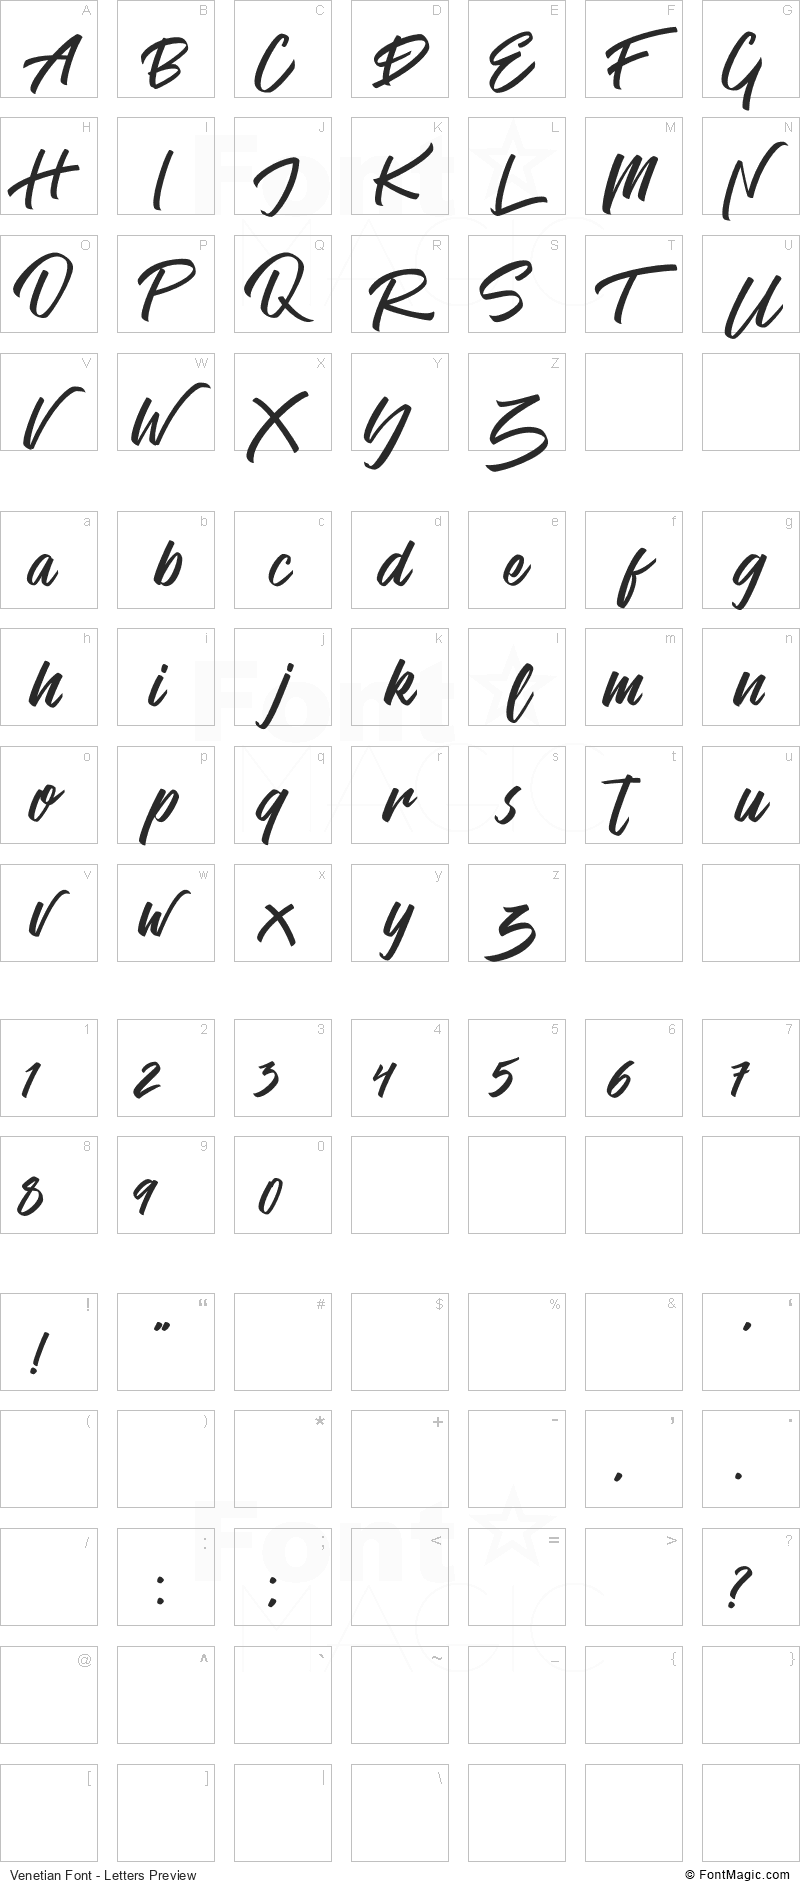 Venetian Font - All Latters Preview Chart